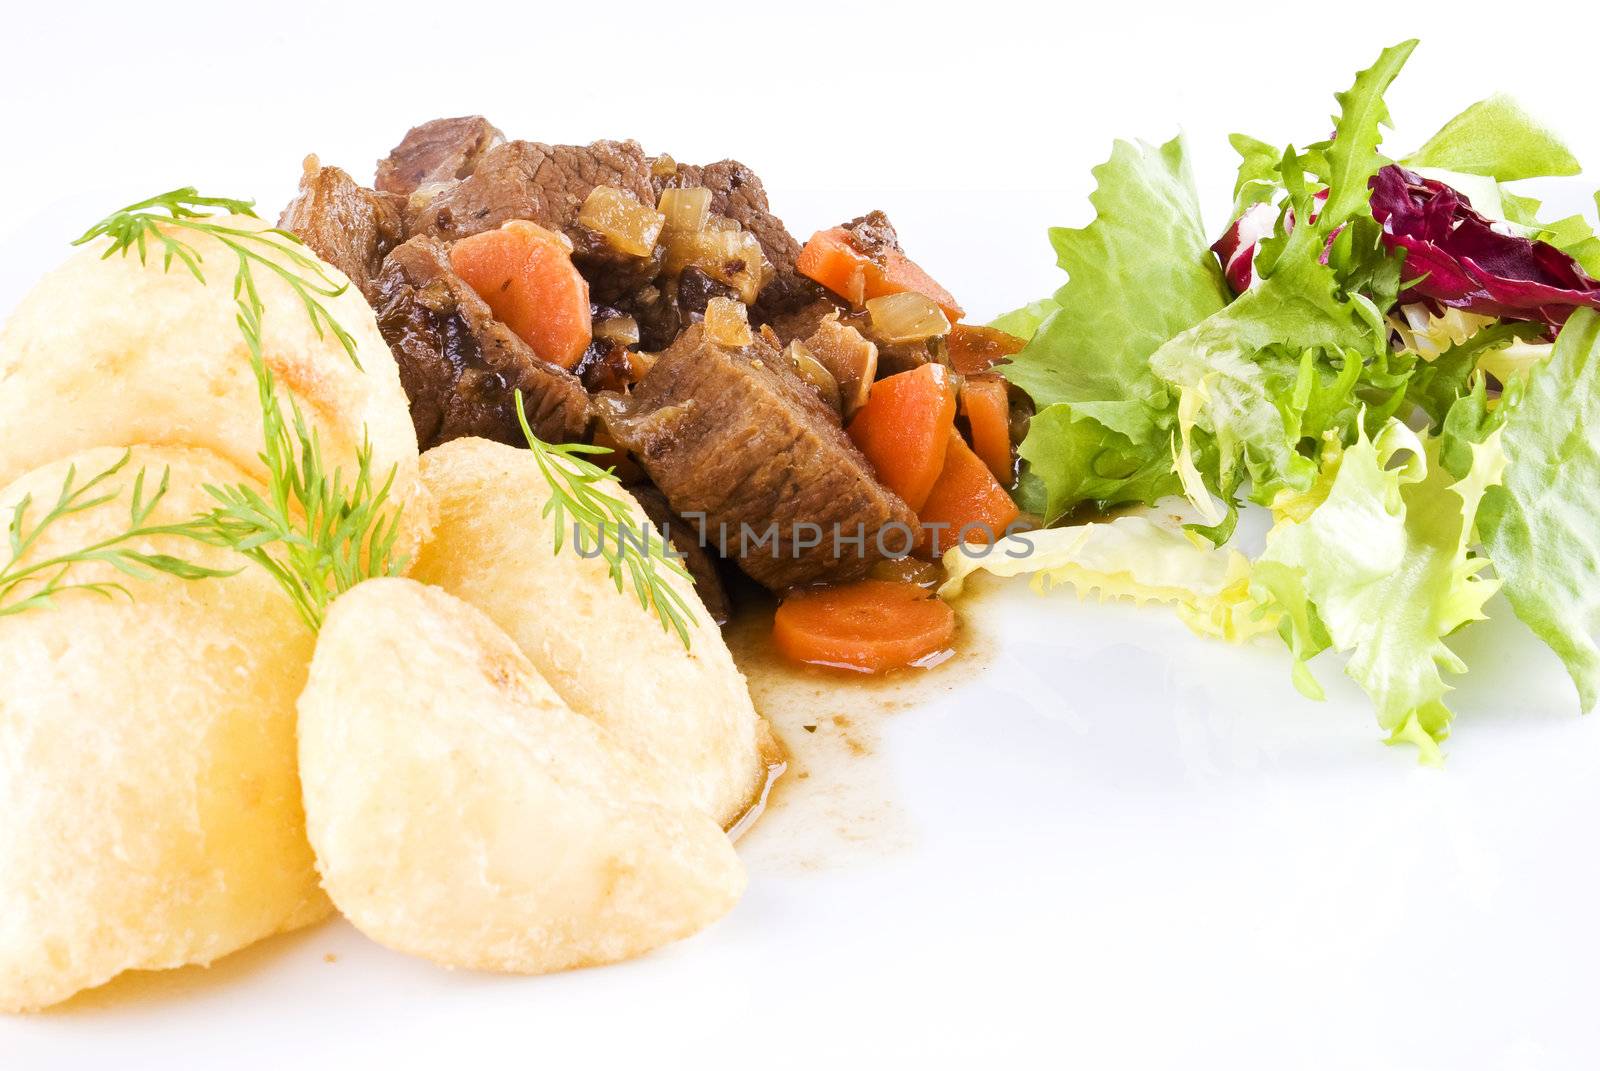 Stewed beef steak with potatoes and salad by caldix